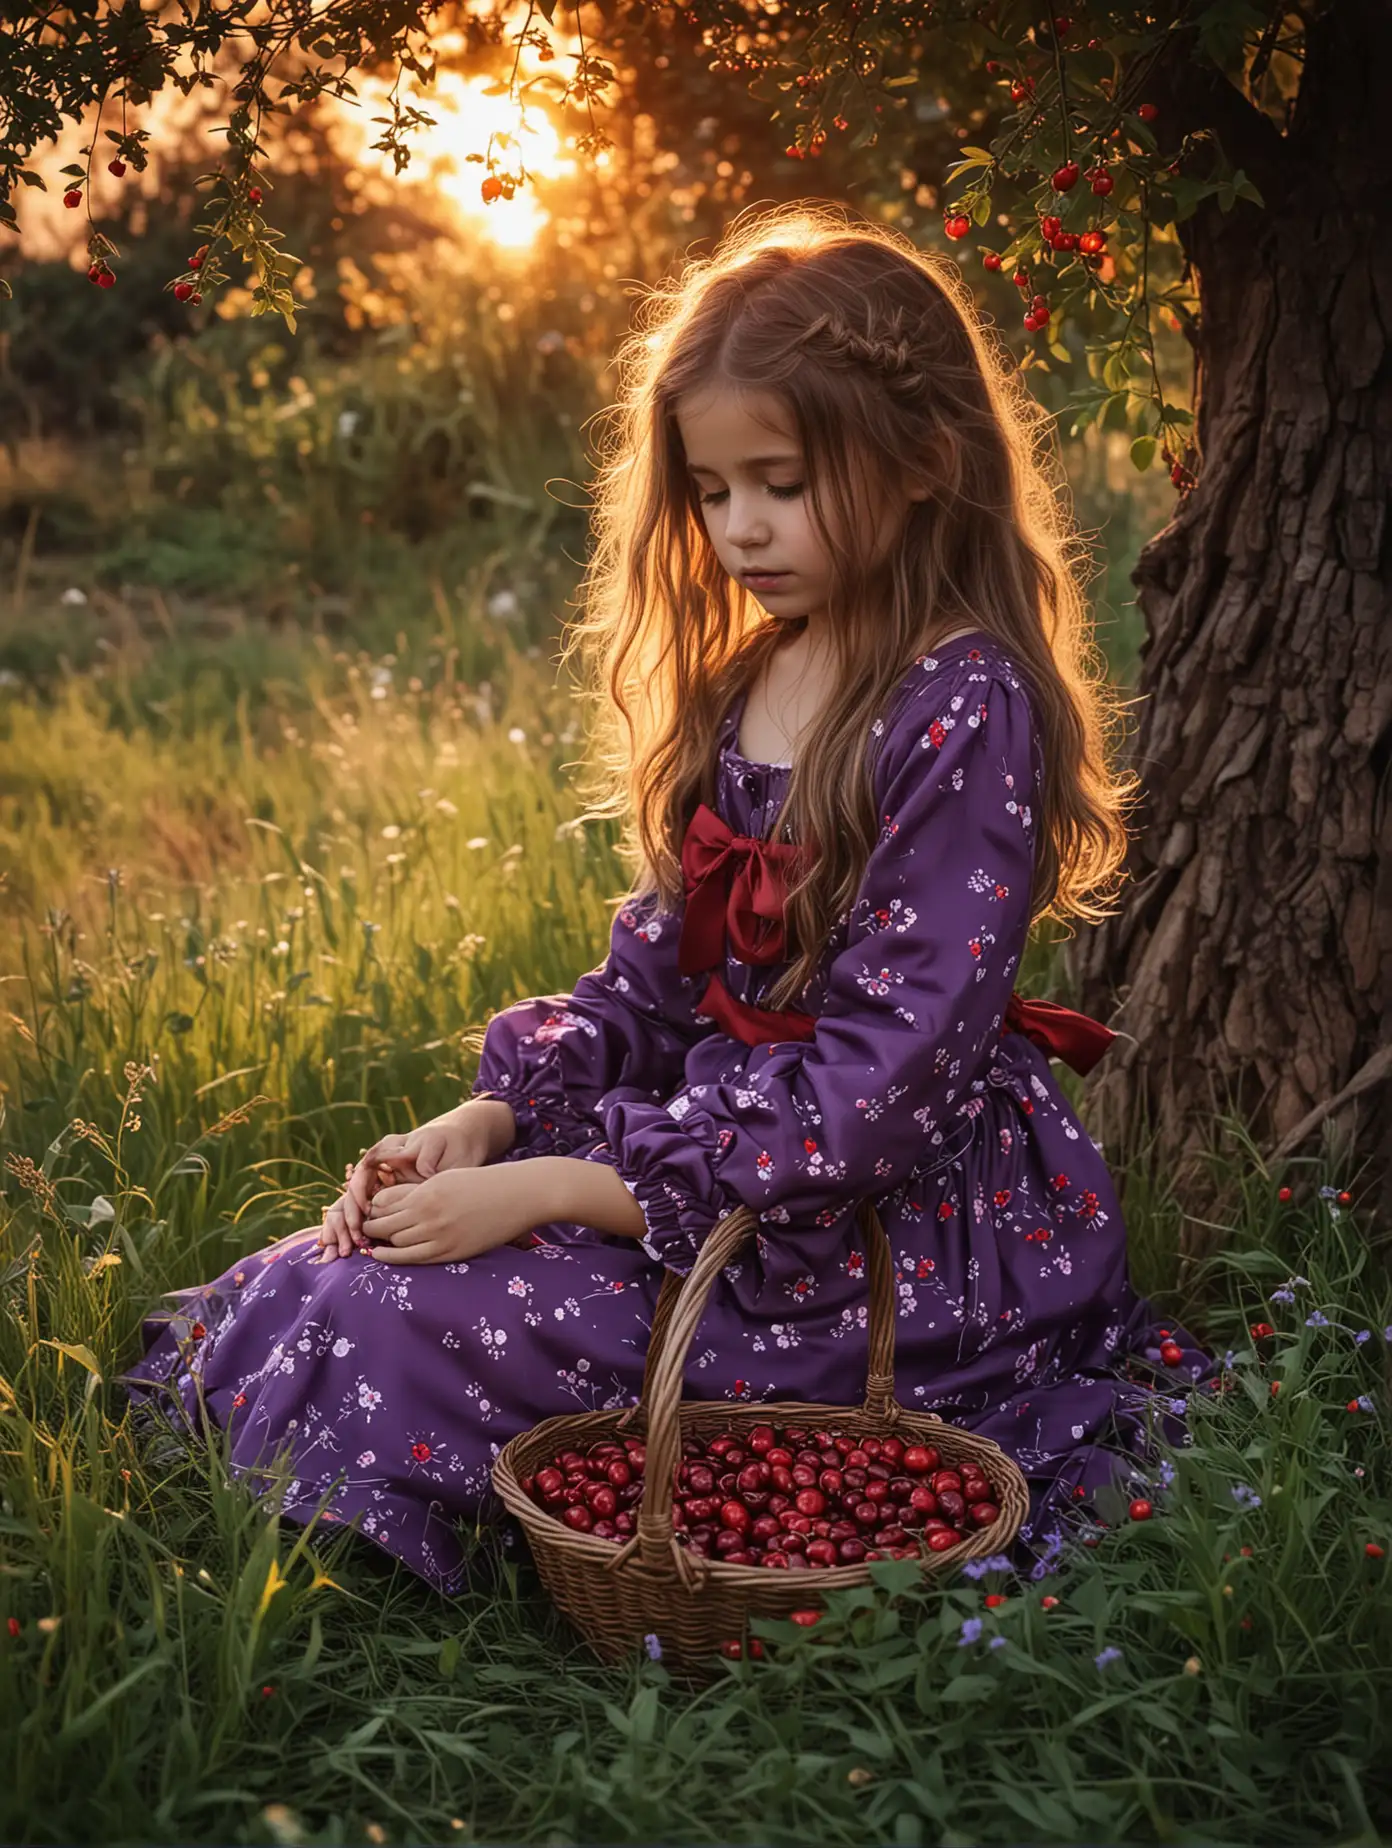 backlight child  sad  dress high_ grass basket   cherries  long   hair purple flowers stormy sunset wind is sitting  red_bow_in_hair tree